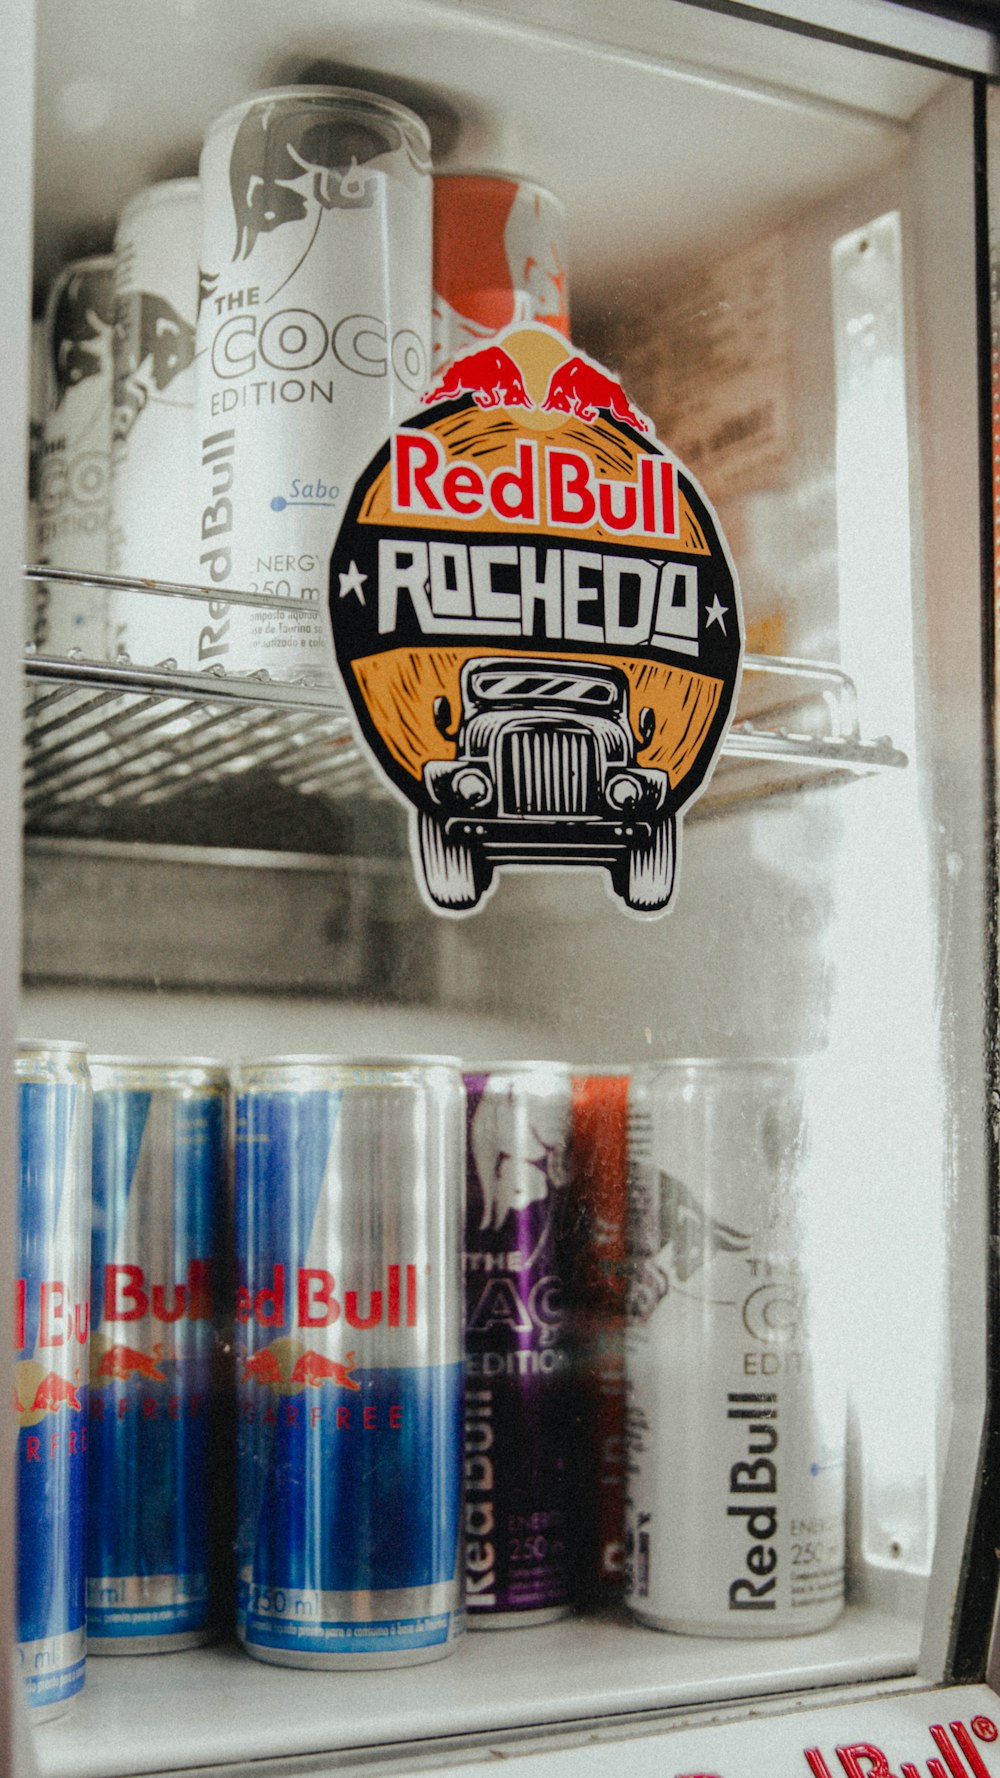 a refrigerator filled with cans and cans of soda